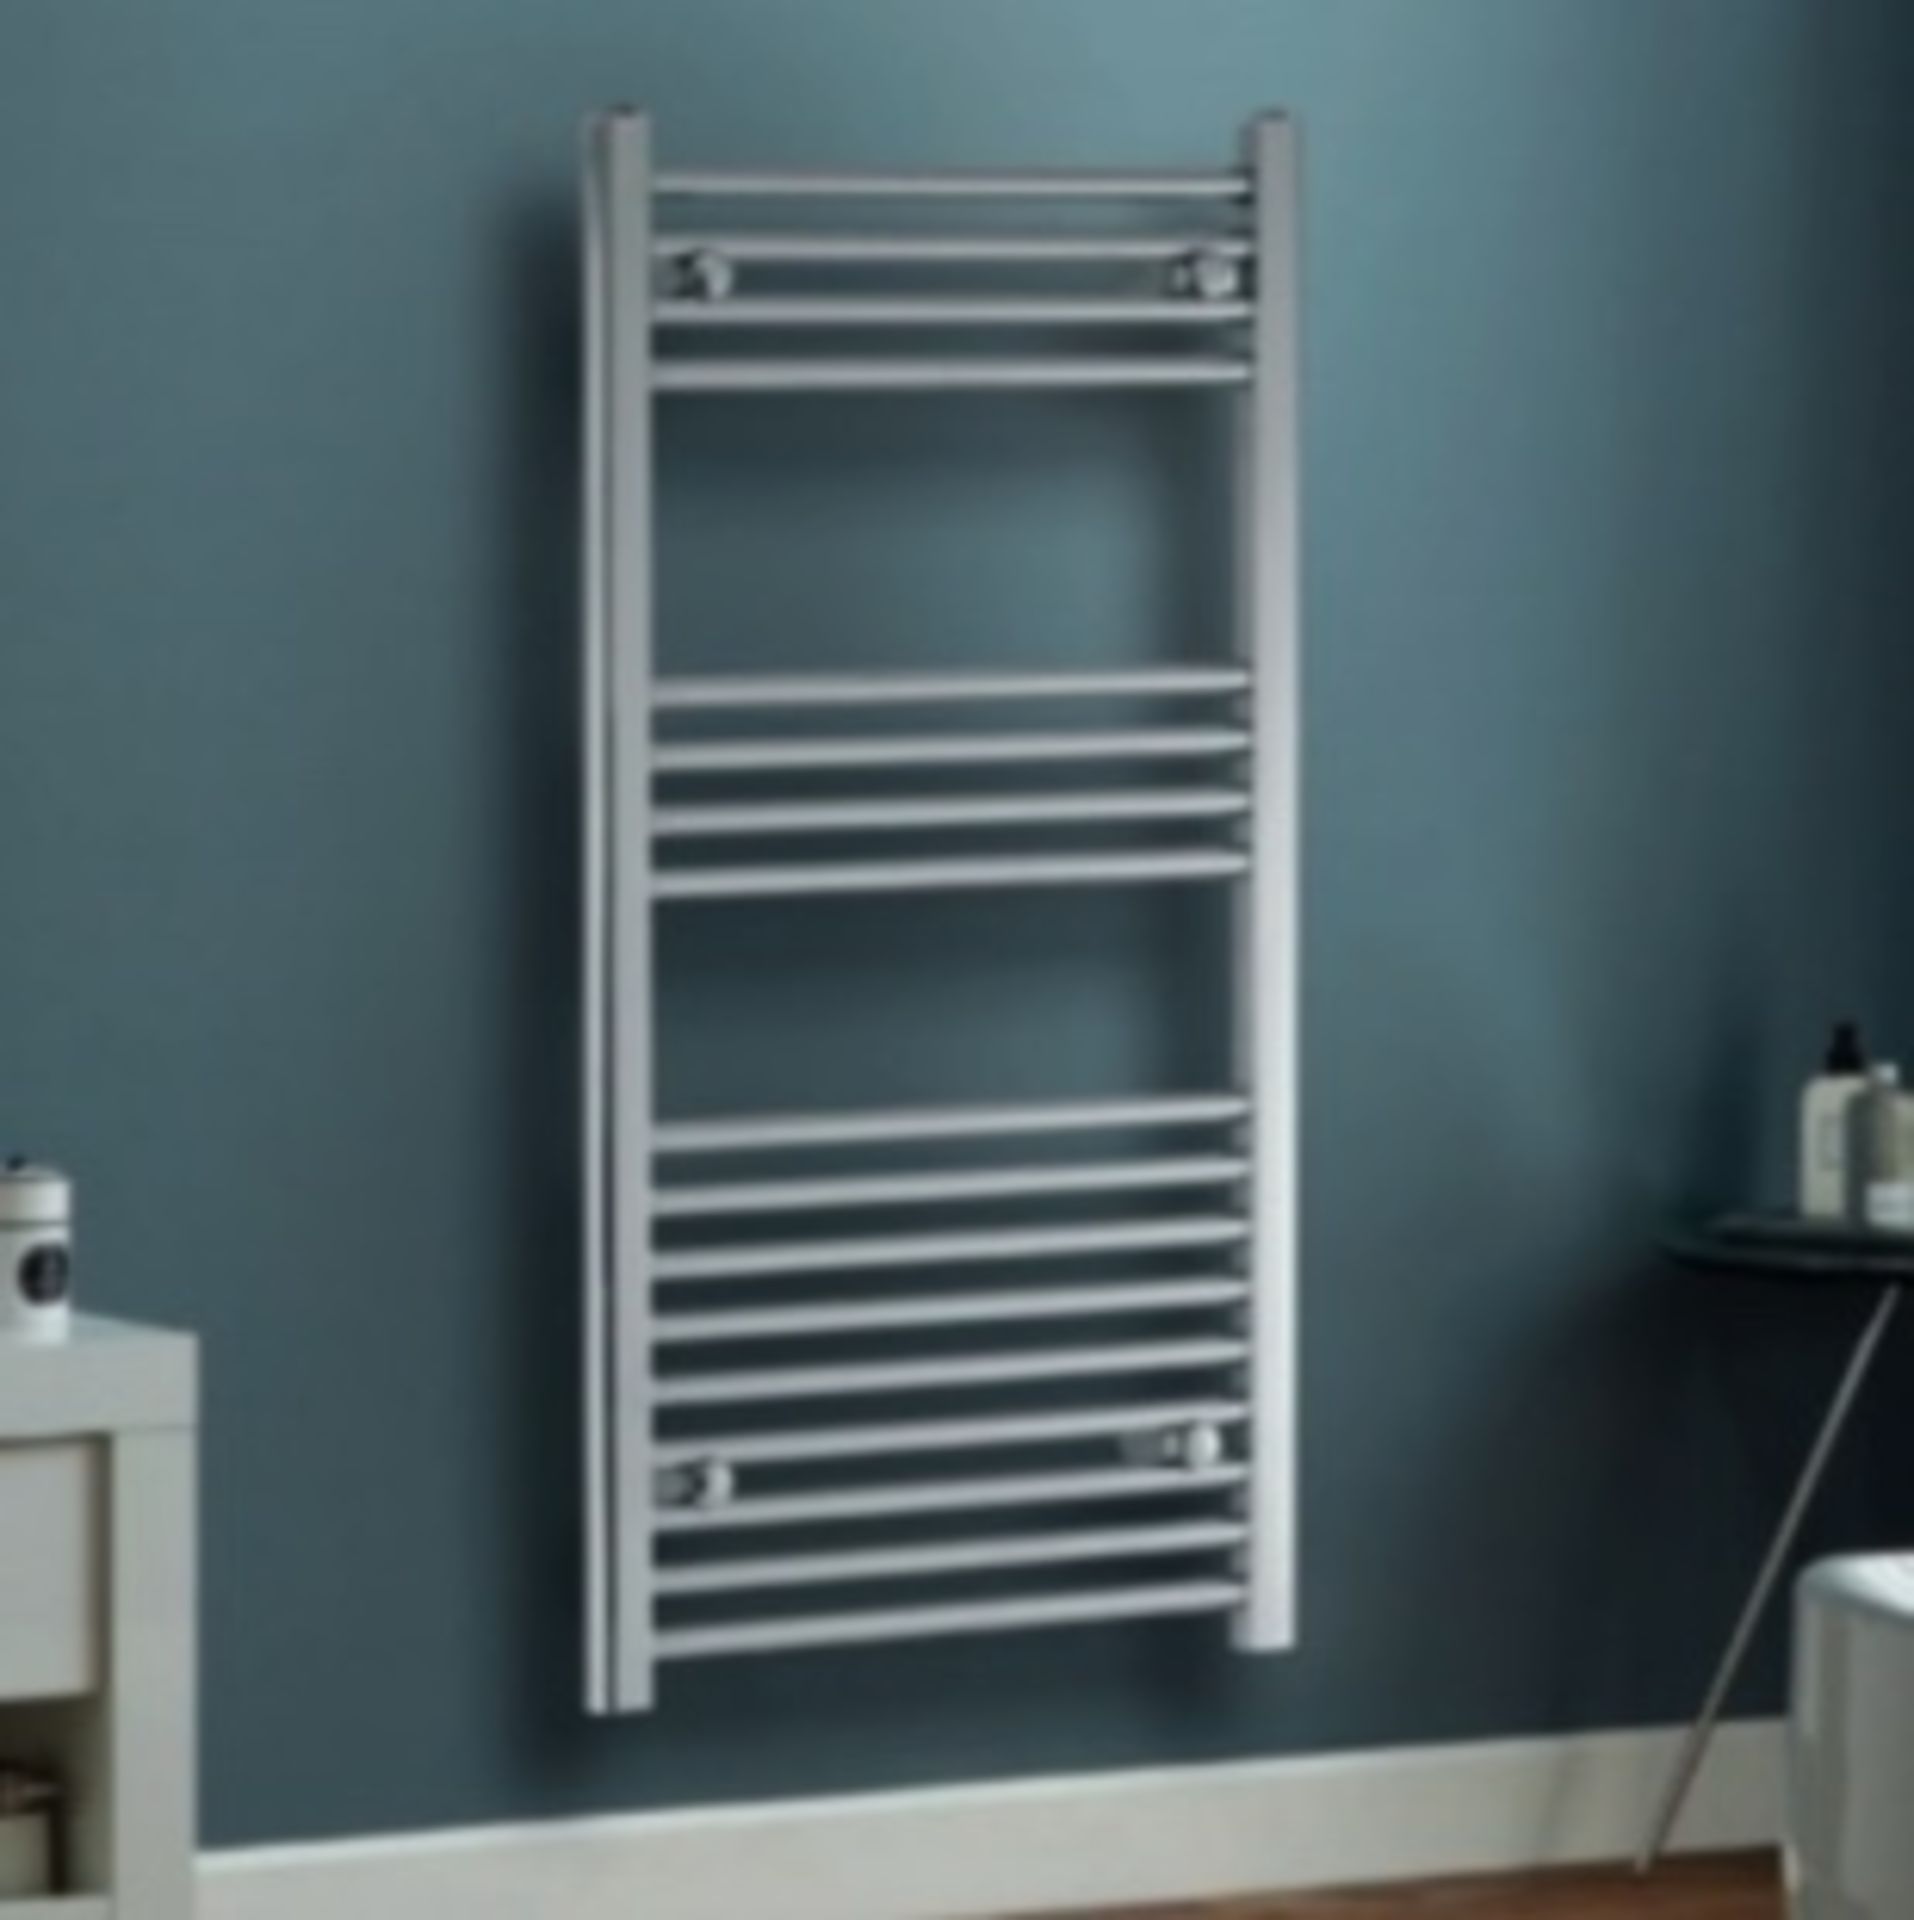 Brand New Boxed Towelrads Independent Chrome Heated Towel Rail 800x400mm RRP £85.98 **NO VAT**